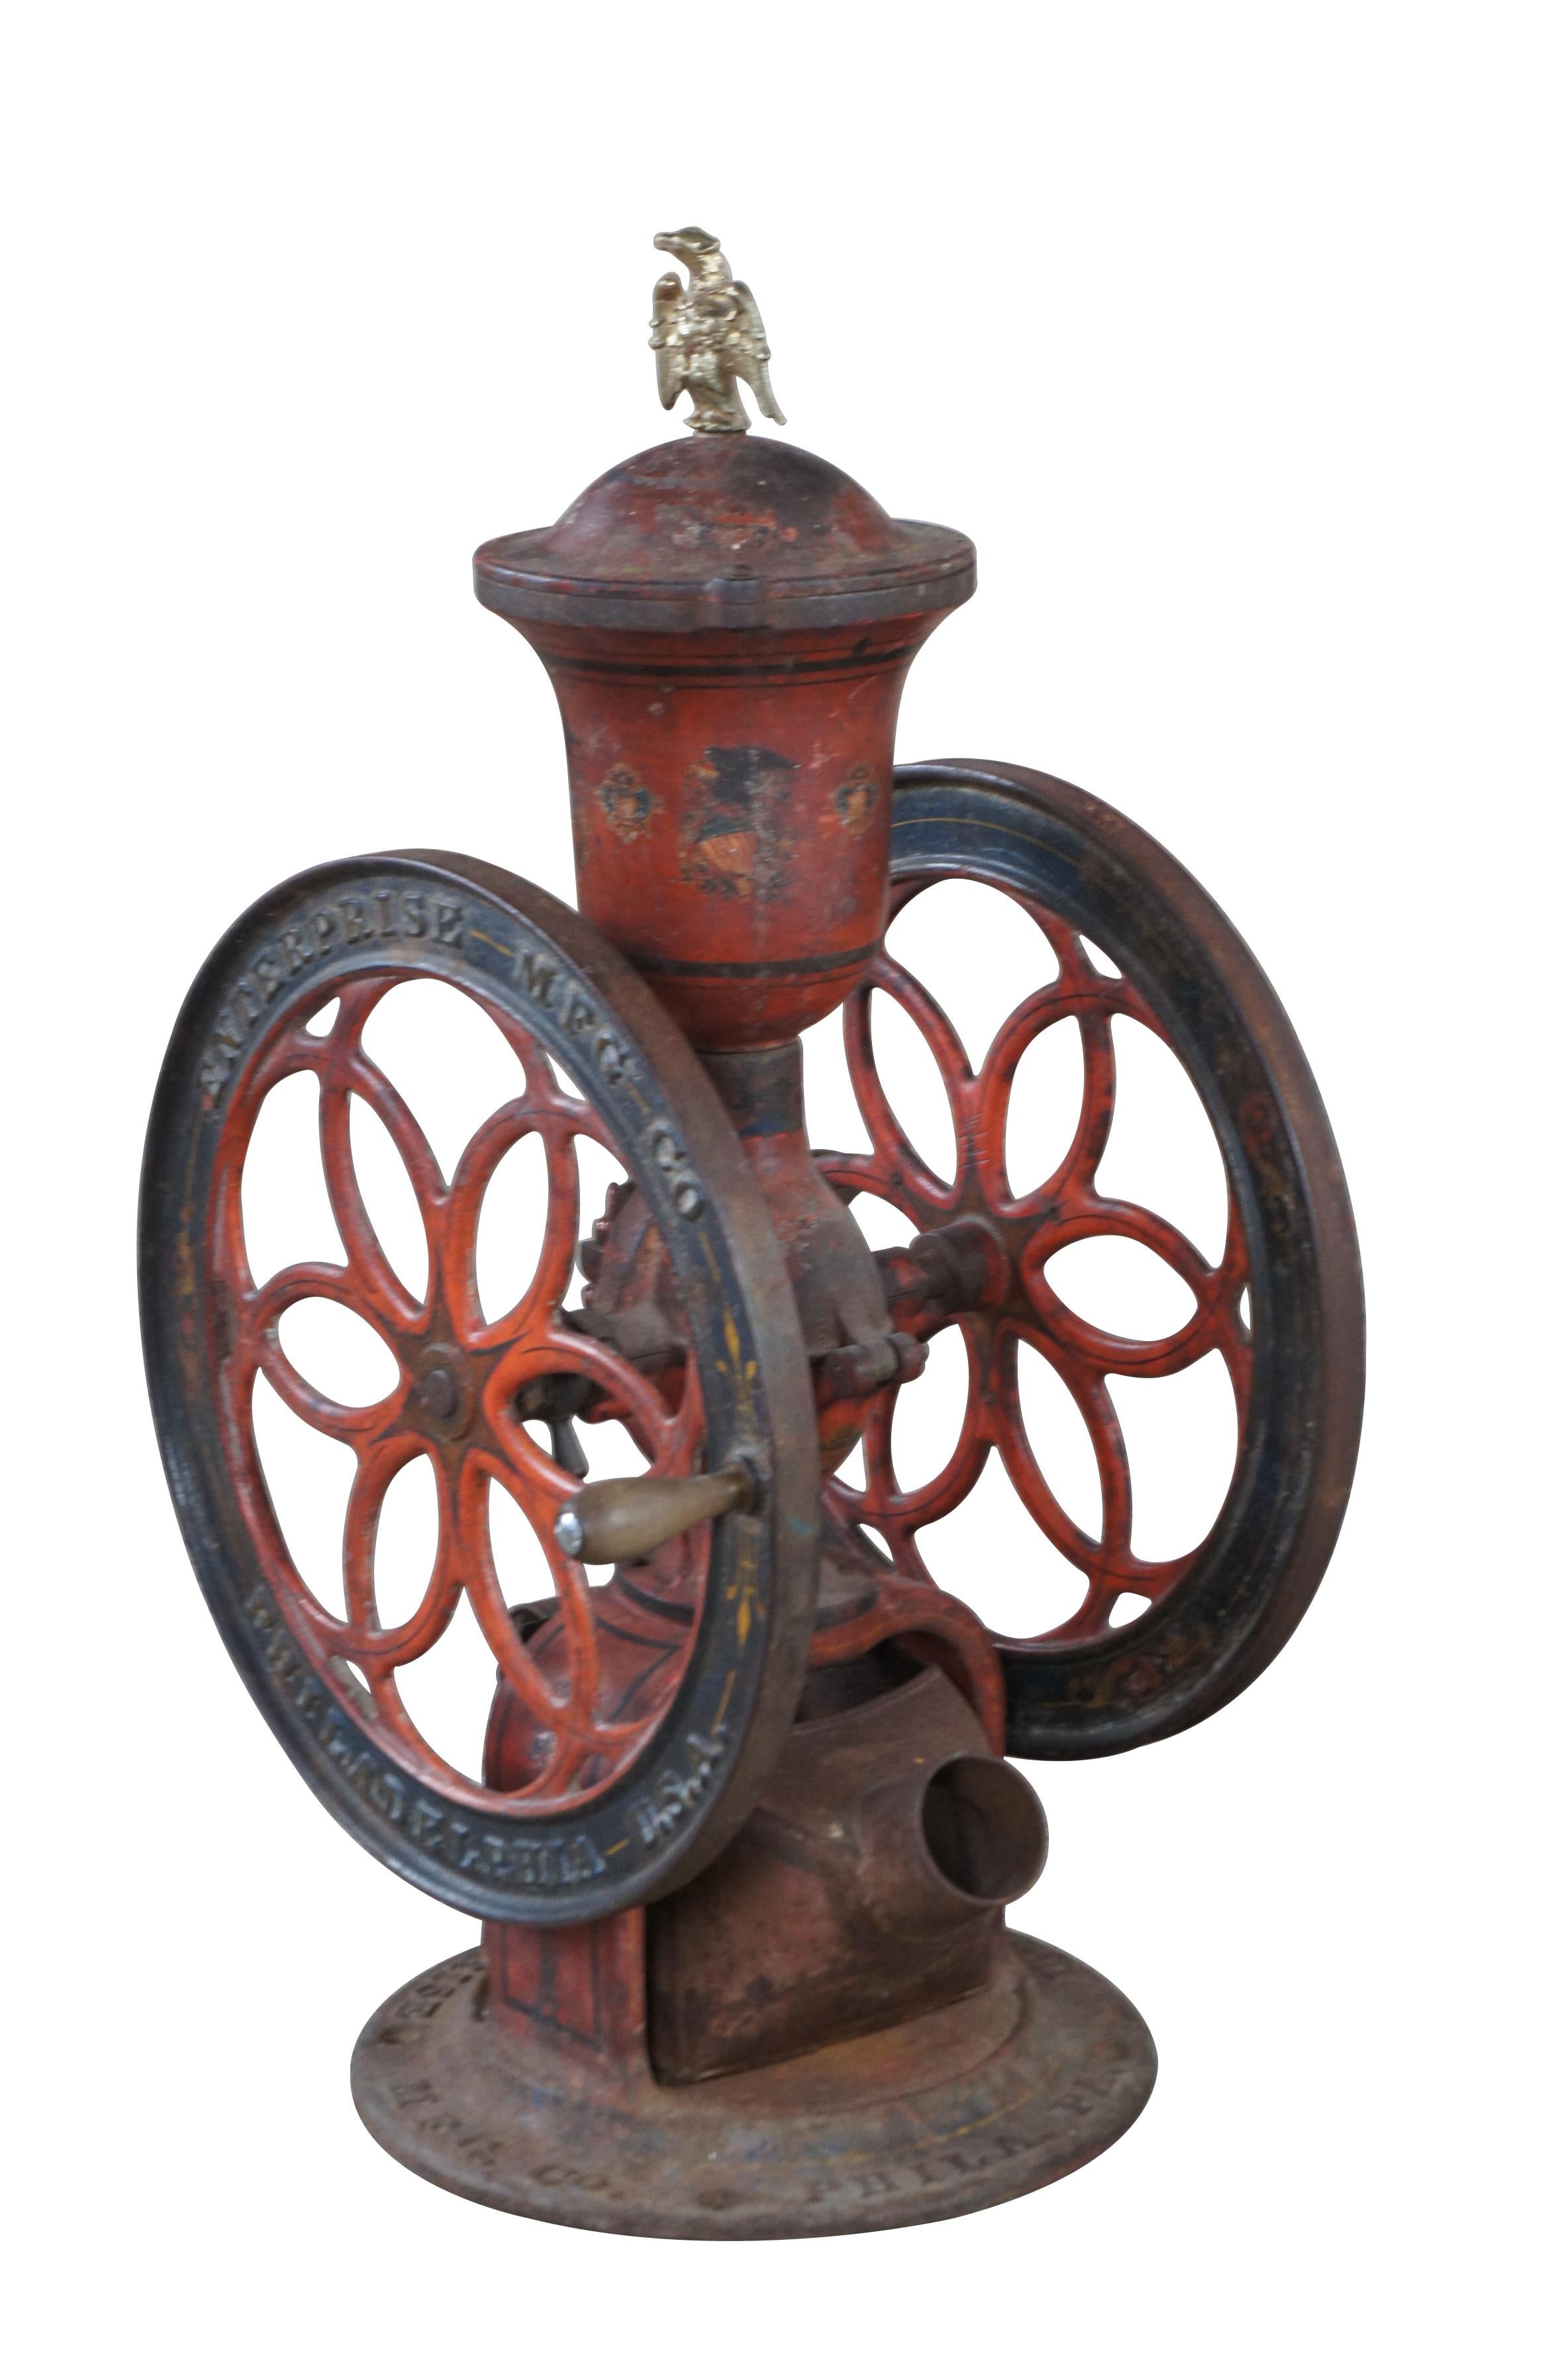 Antique Enterprise Mfg Co coffee grinder / mill, circa 1876. It is one of the largest and heaviest of the counter top grinders, made for the country general stores and farmhouses. This double wheeled coffee grinder is made of cast iron and features